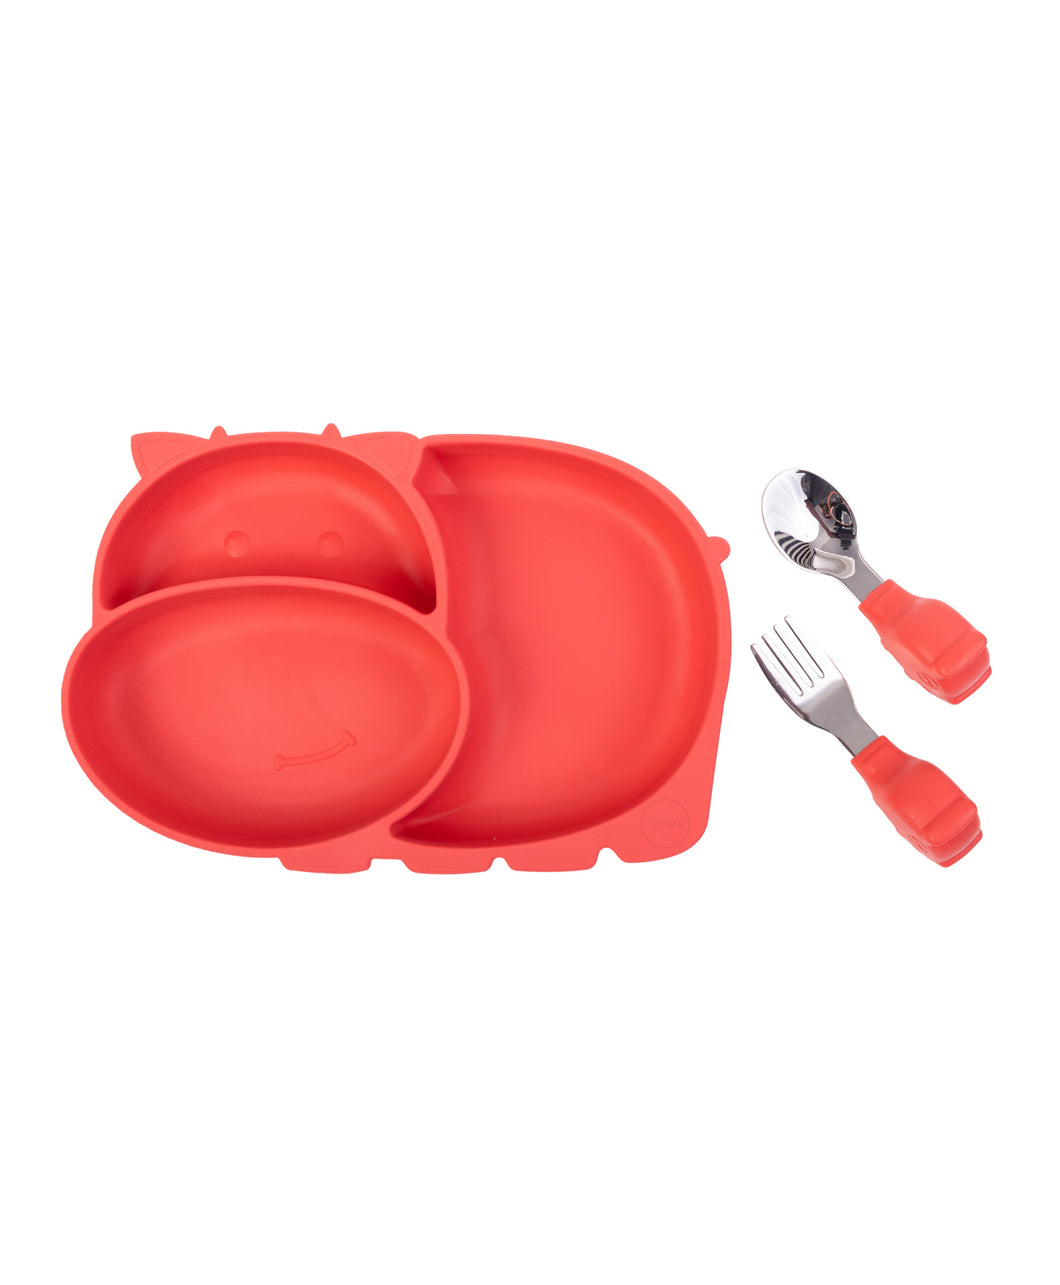 Kids Hippo plate with cutlery set Red by Amini